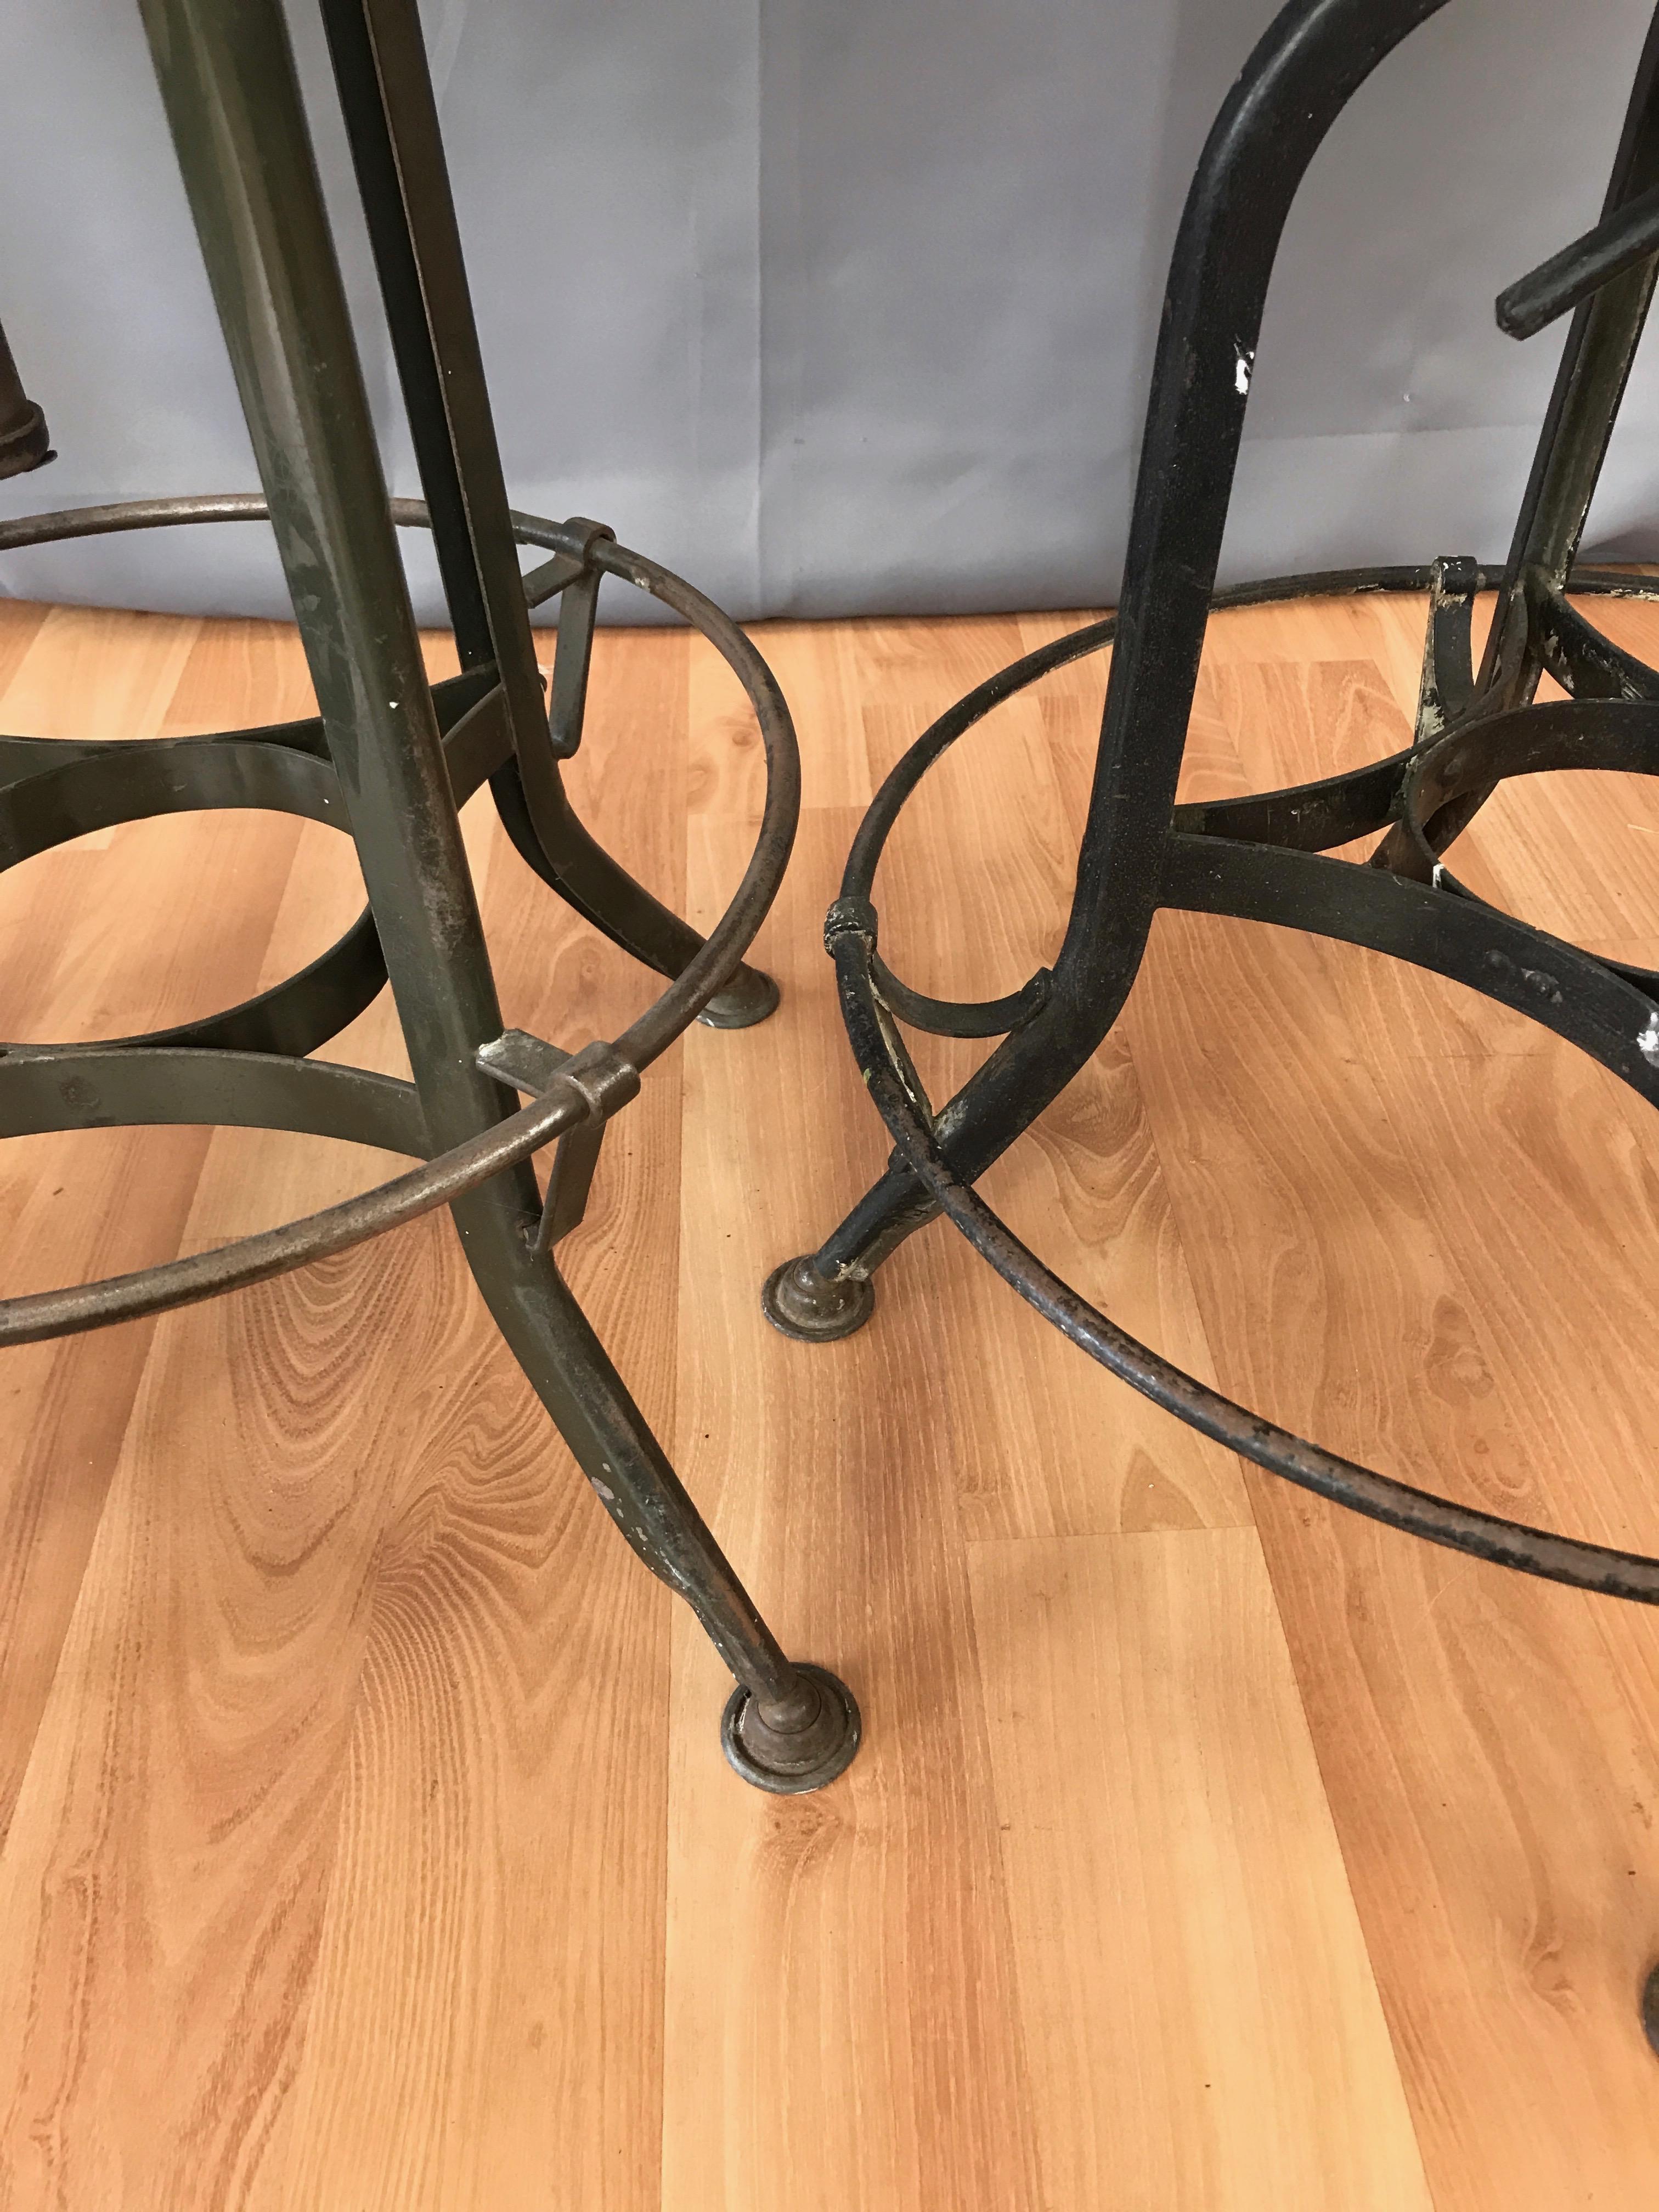 Toledo Industrial Adjustable Height Swivel Stools with Backs, Two Available 12